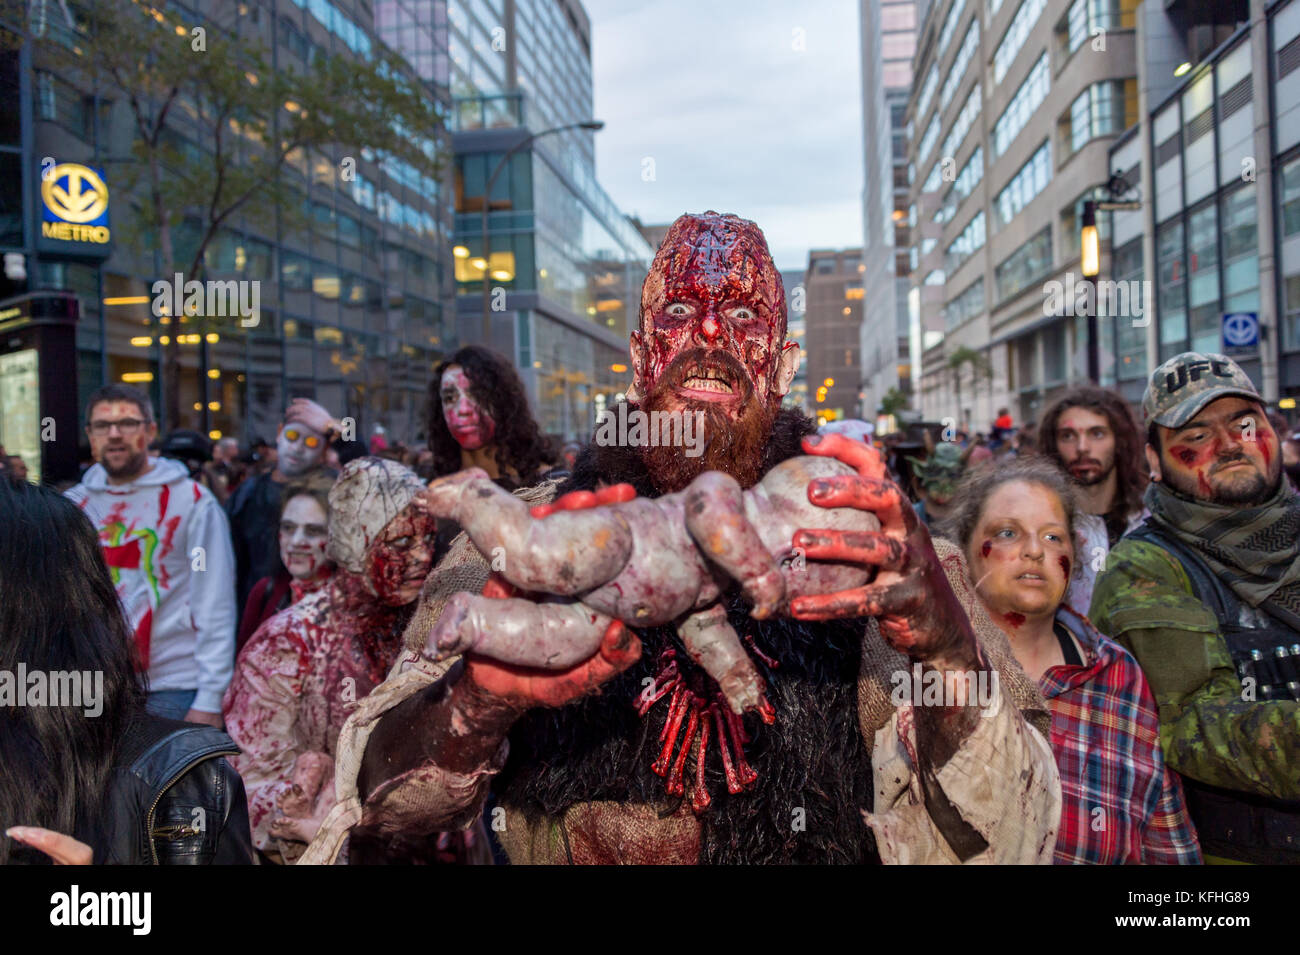 Montreal, Canada. 28th October 2017. People taking part in the Zombie Walk in Montreal Downtown Credit: Marc Bruxelle/Alamy Live News Stock Photo